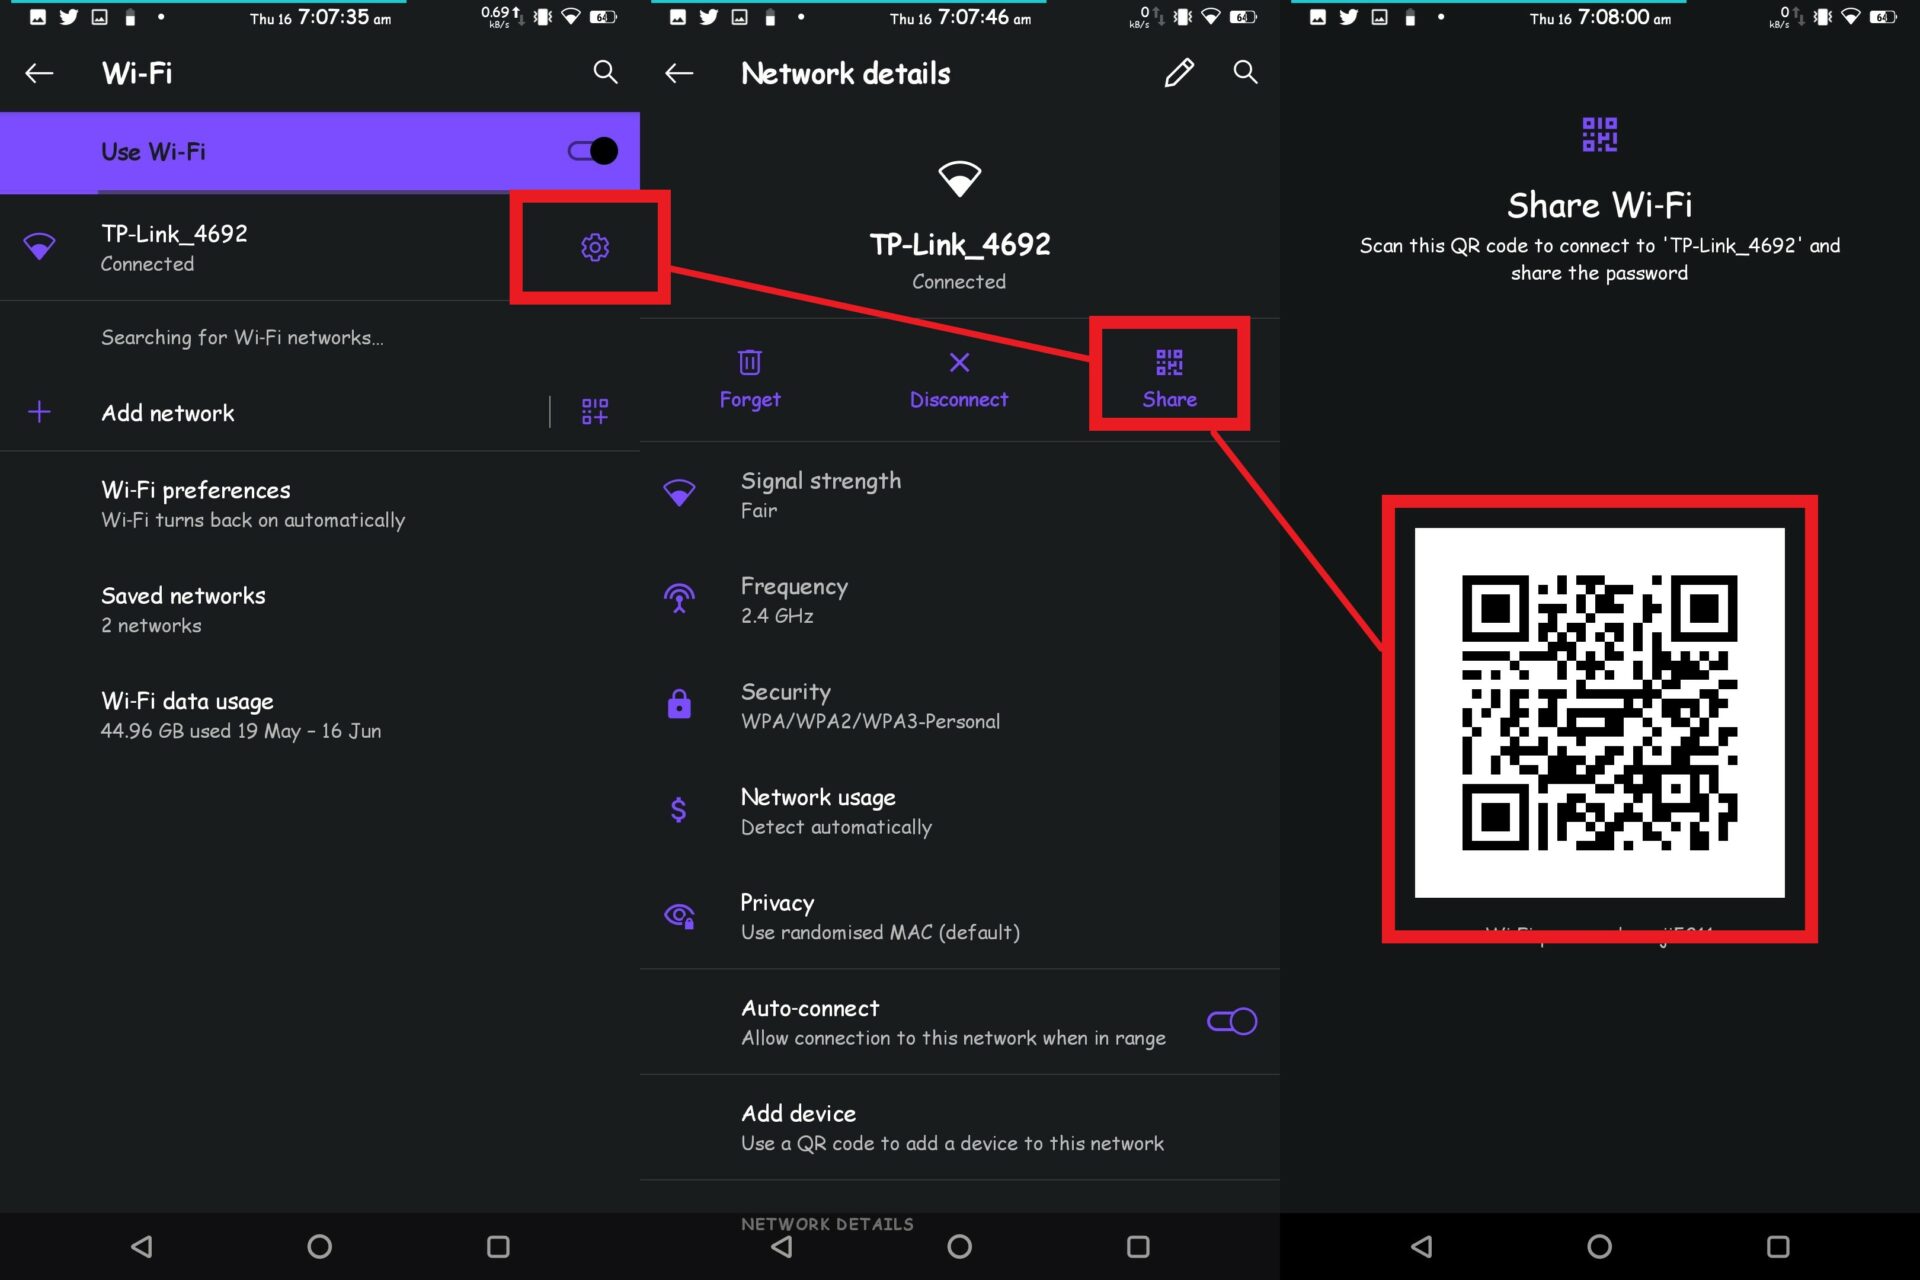 Generate QR code from connected WIFi device to connect without password